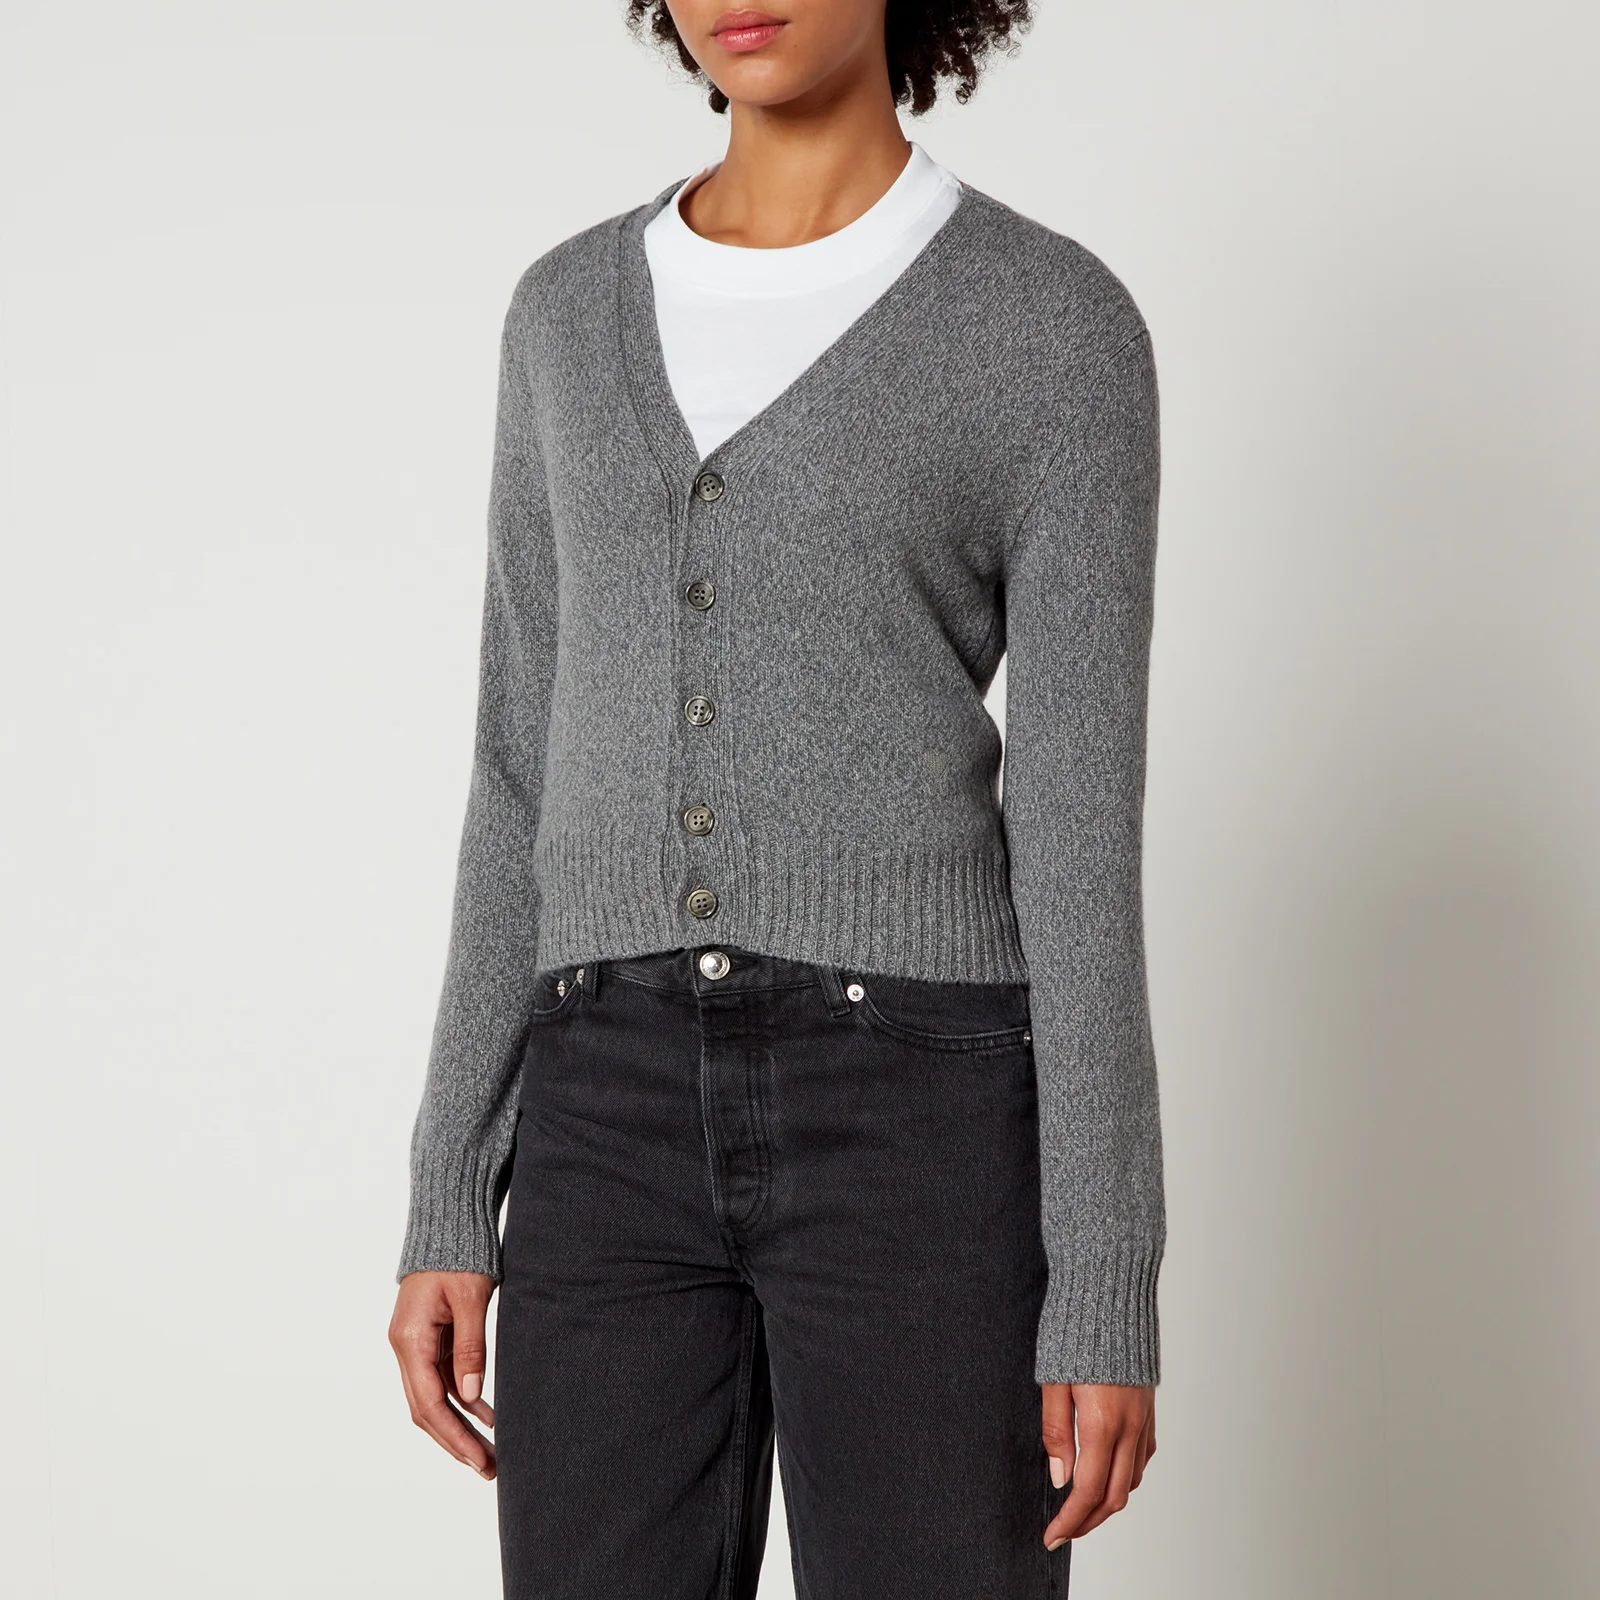 AMI de Coeur Cashmere and Wool-Blend Cardigan Image 1